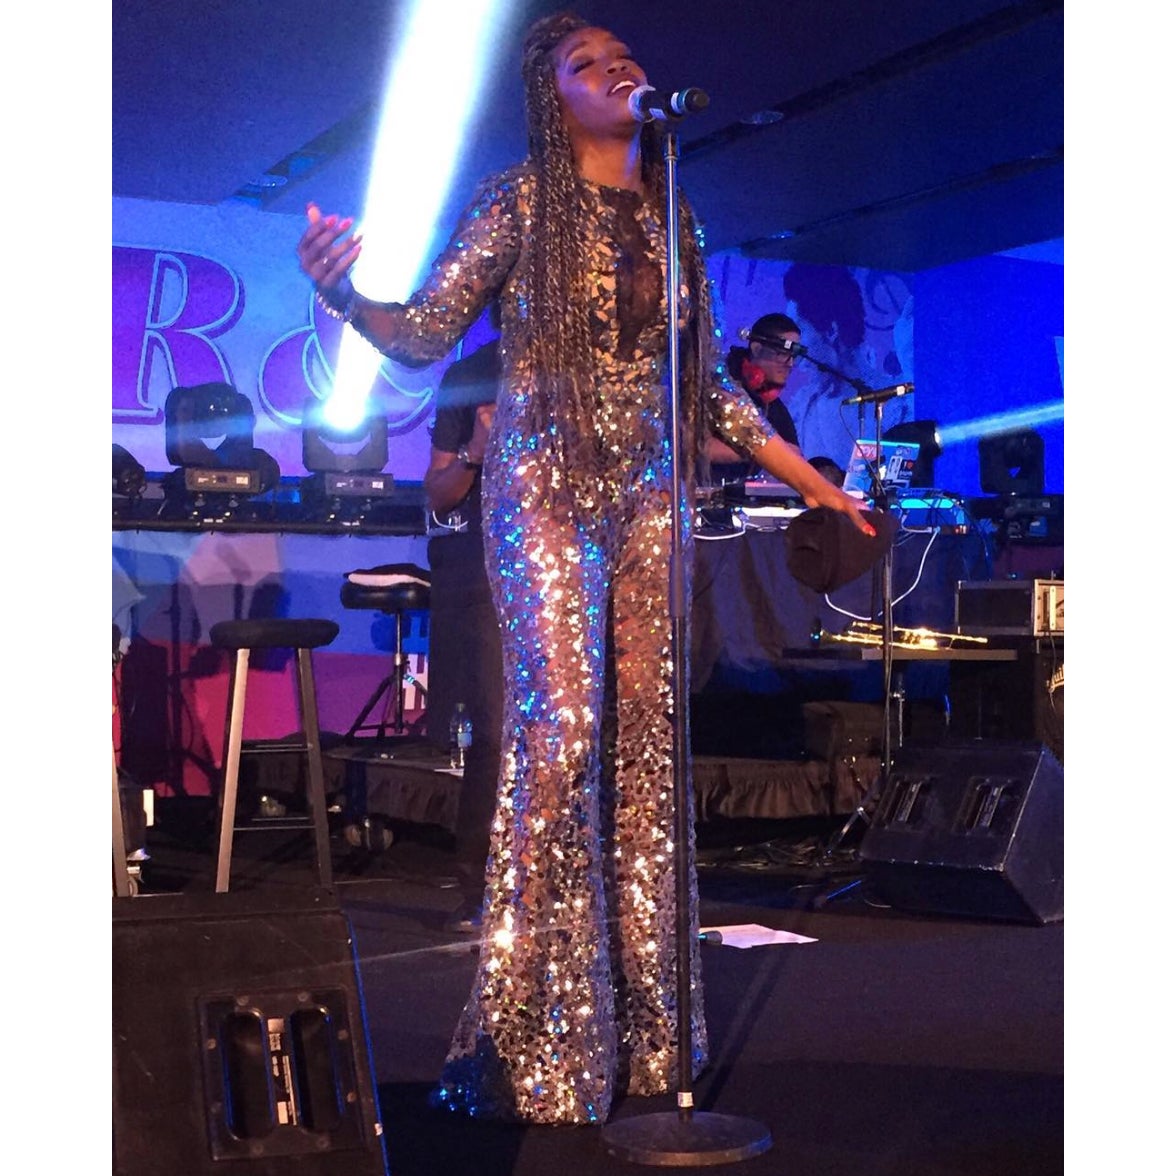 24 of The Best Celeb Instagram Photos From ESSENCE Festival 2016
